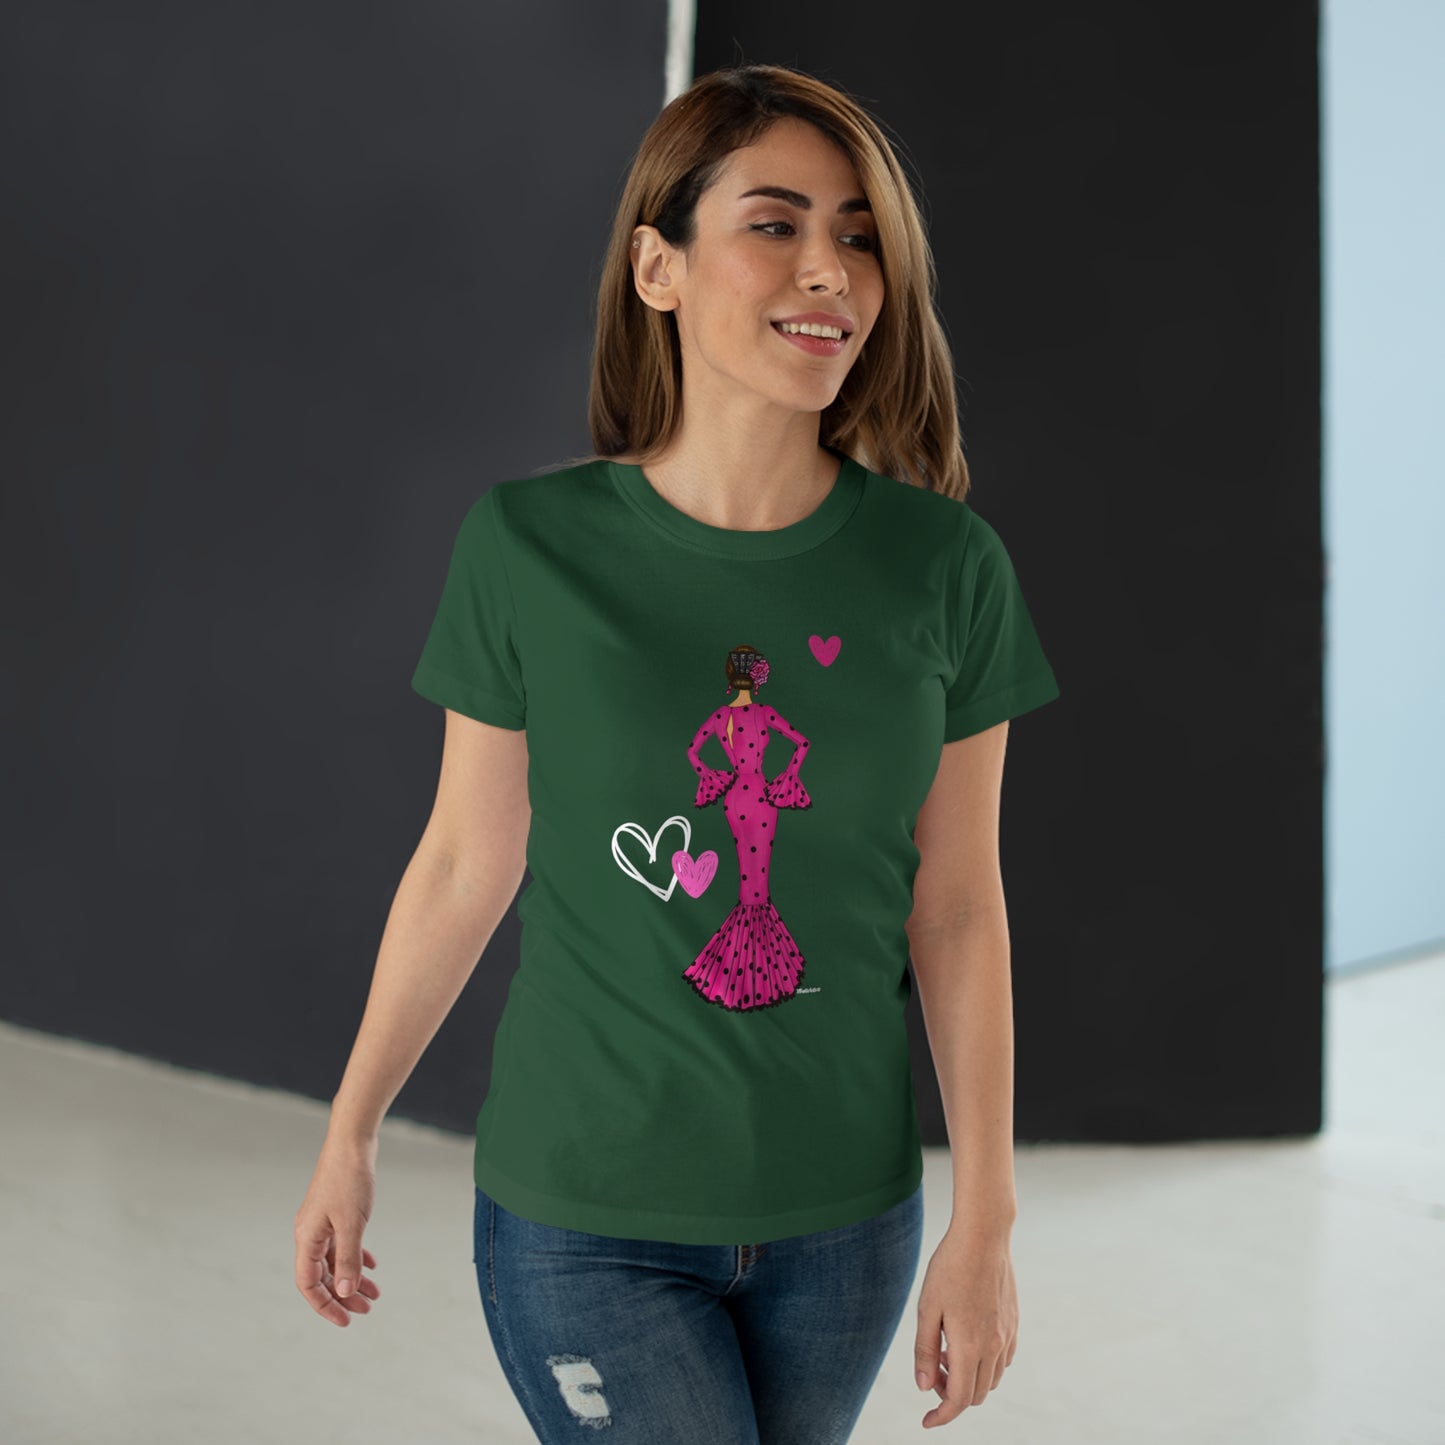 a woman wearing a green t - shirt with a pink princess on it